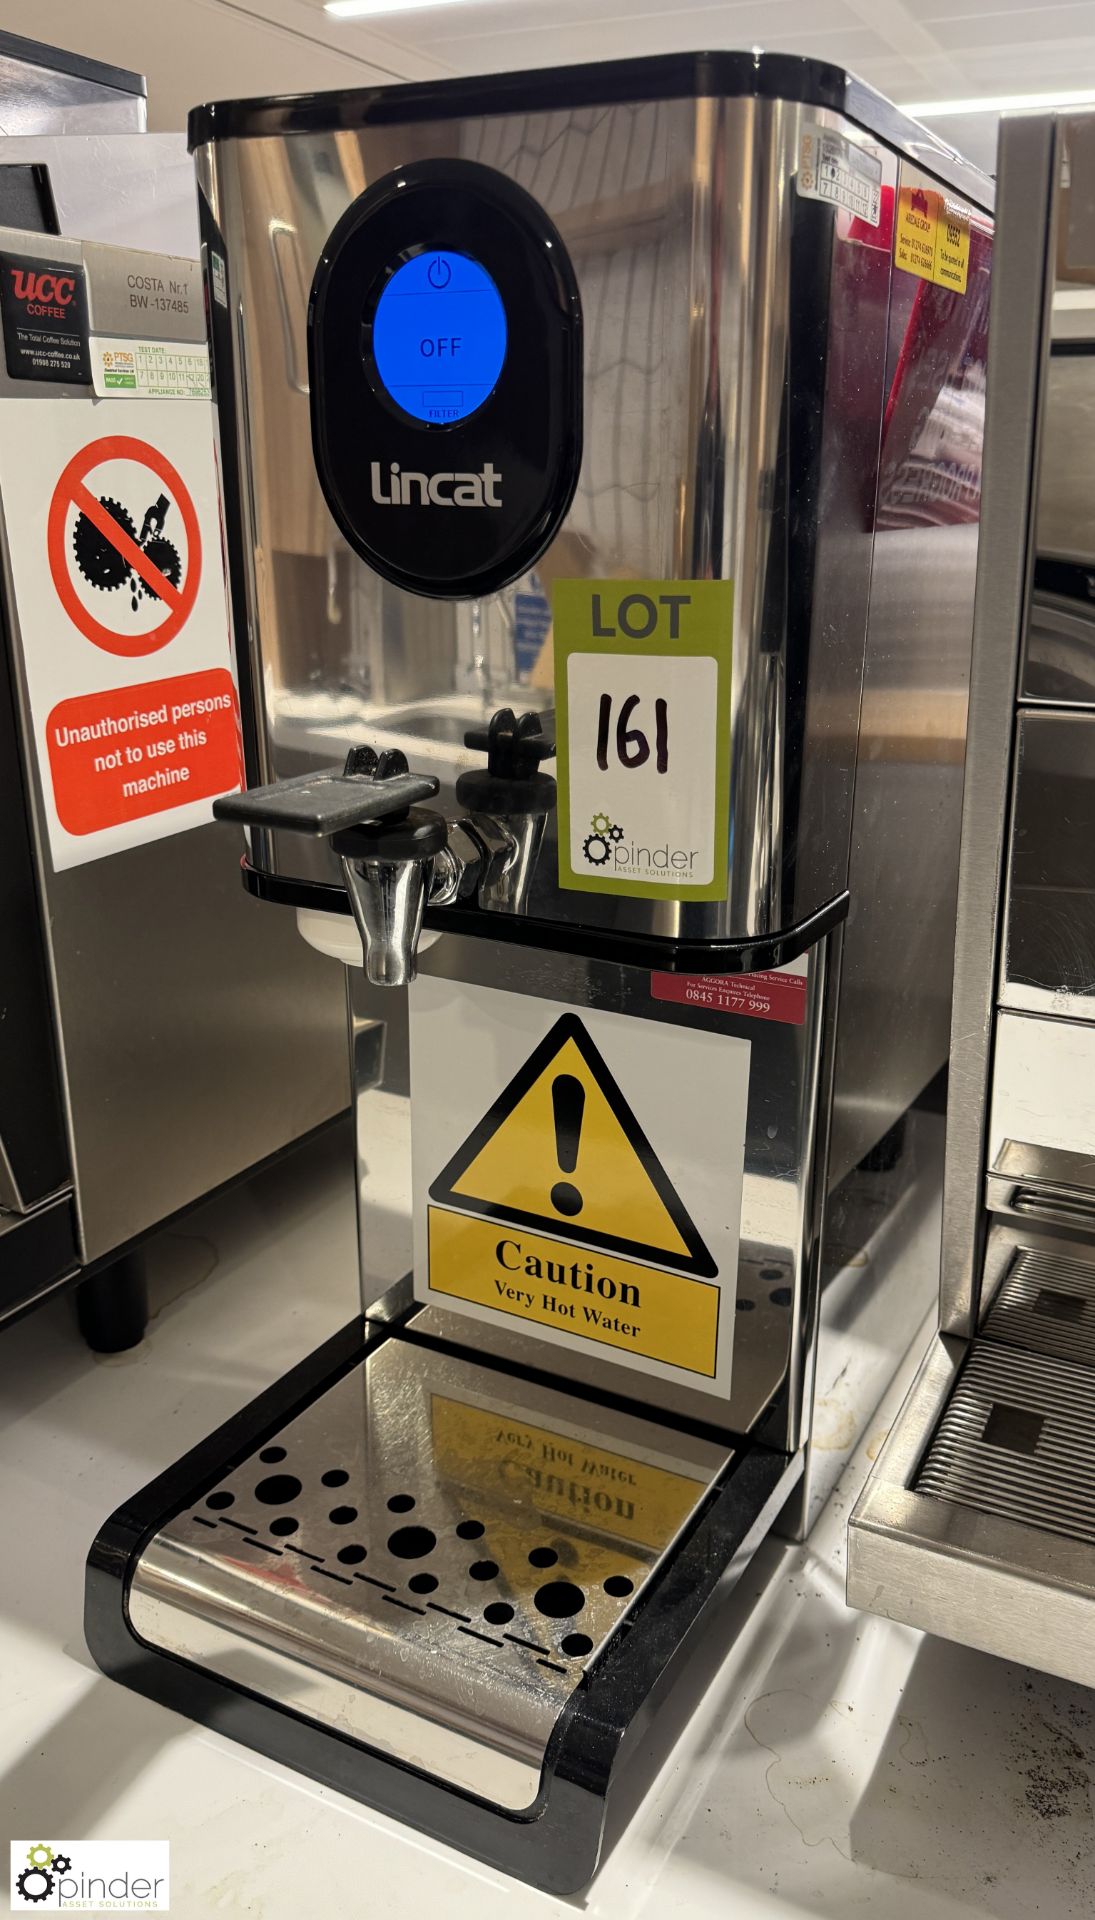 Lincat Hot Water Dispenser (location in building - level 11 main canteen) - Image 2 of 3